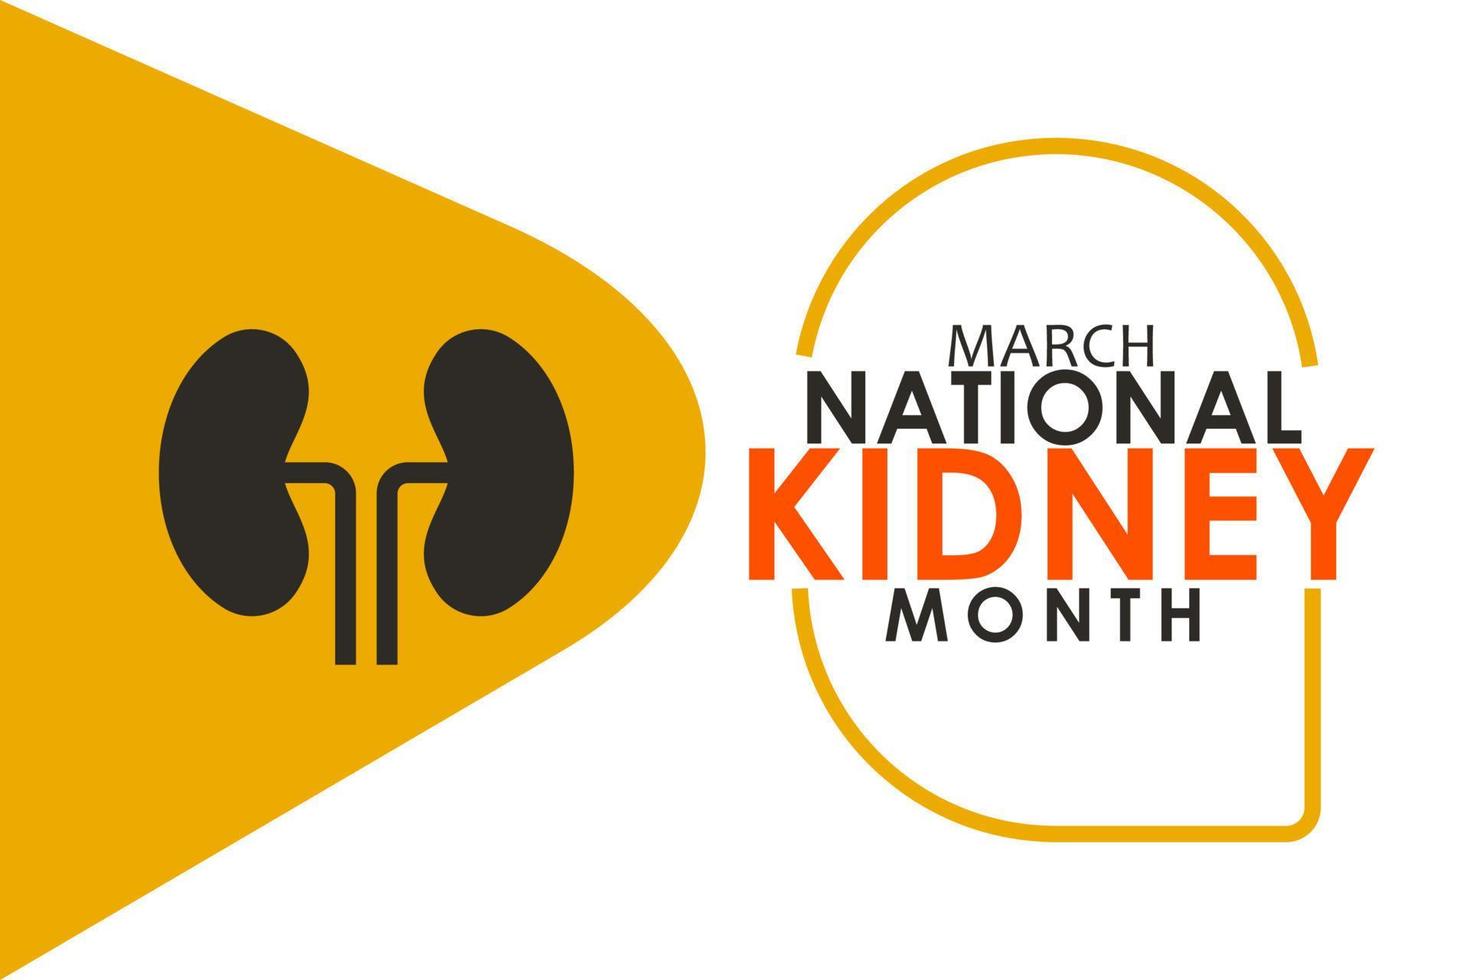 National Kidney month observed annually in March to raise awareness about kidney disease. Vector illustration